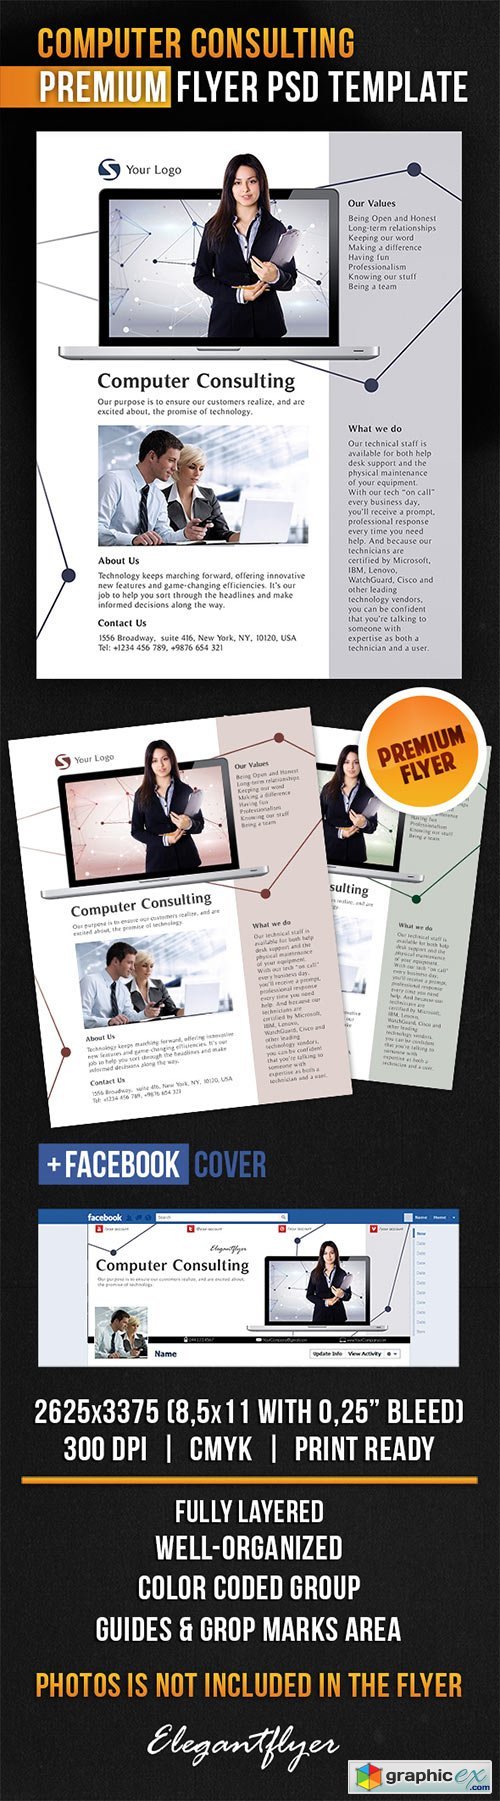 Computer Consulting Flyer PSD Template + Facebook Cover